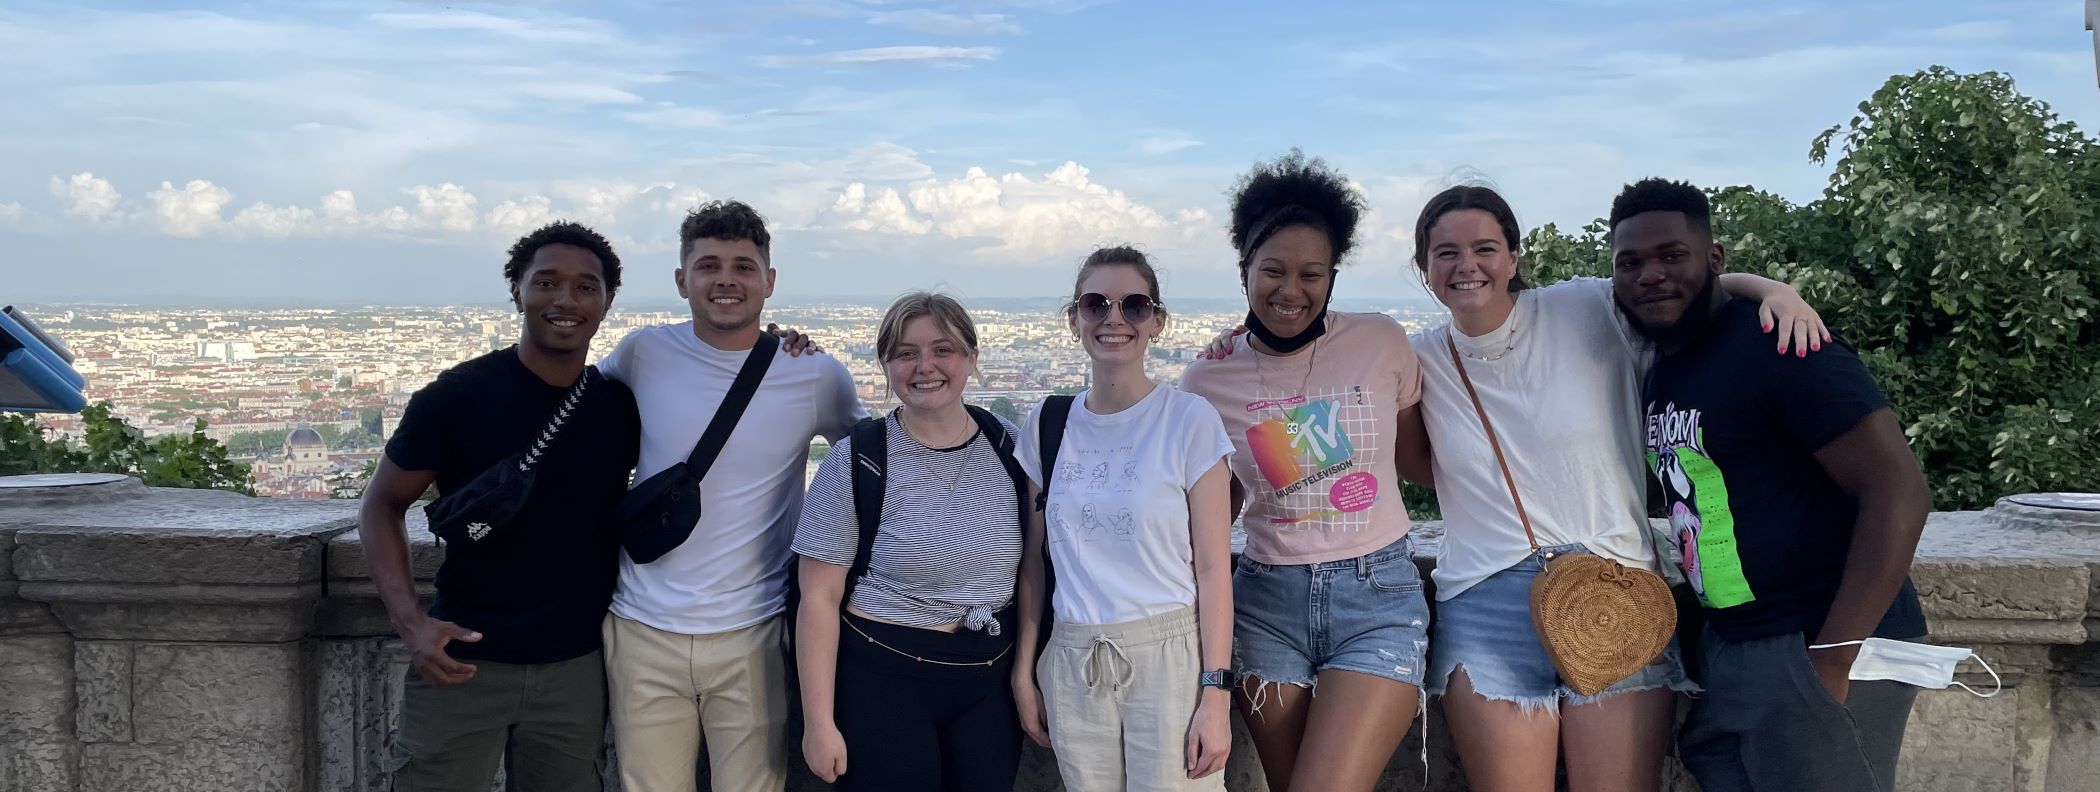 Group of students in the Summer Program in Lyon, France.